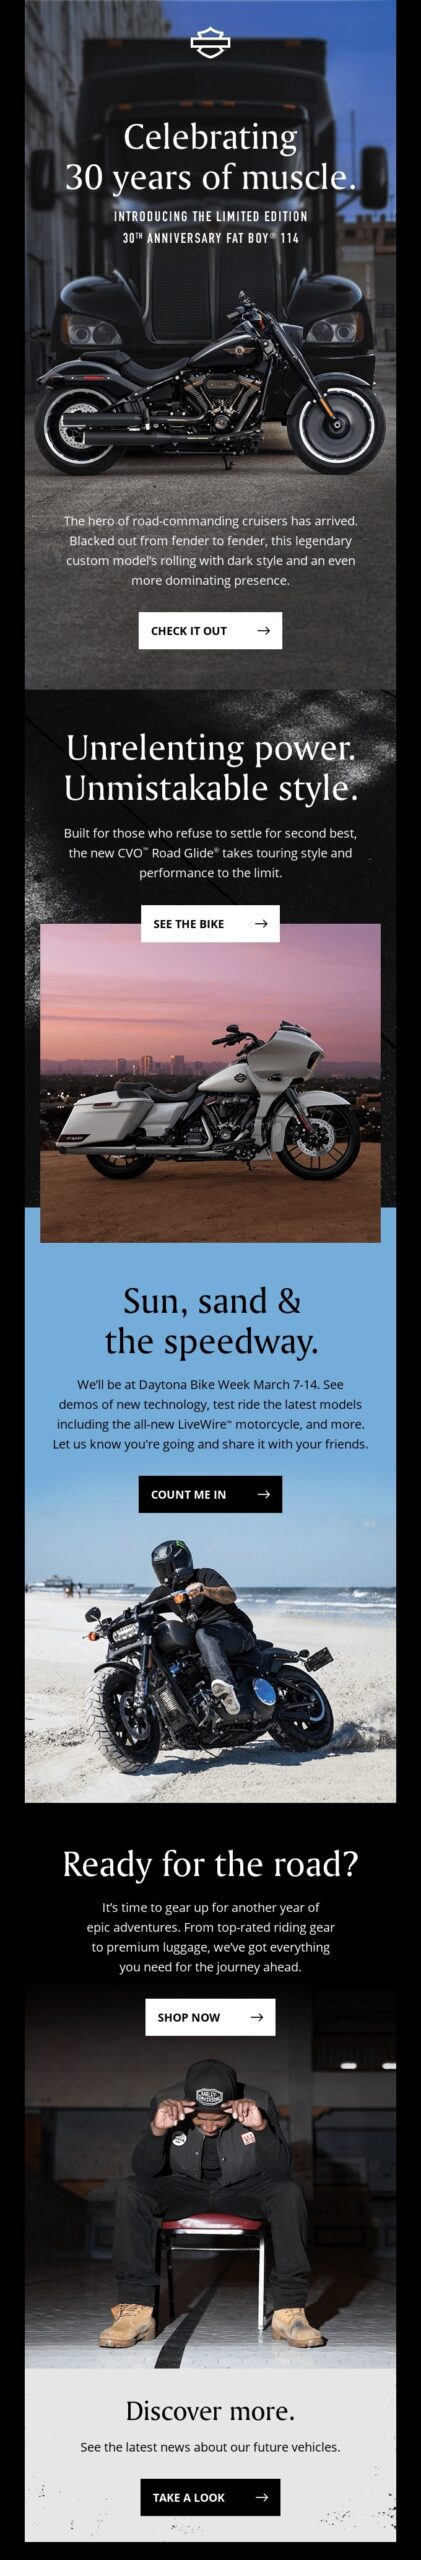 Effective email branding tone of voice by Harley-Davidson